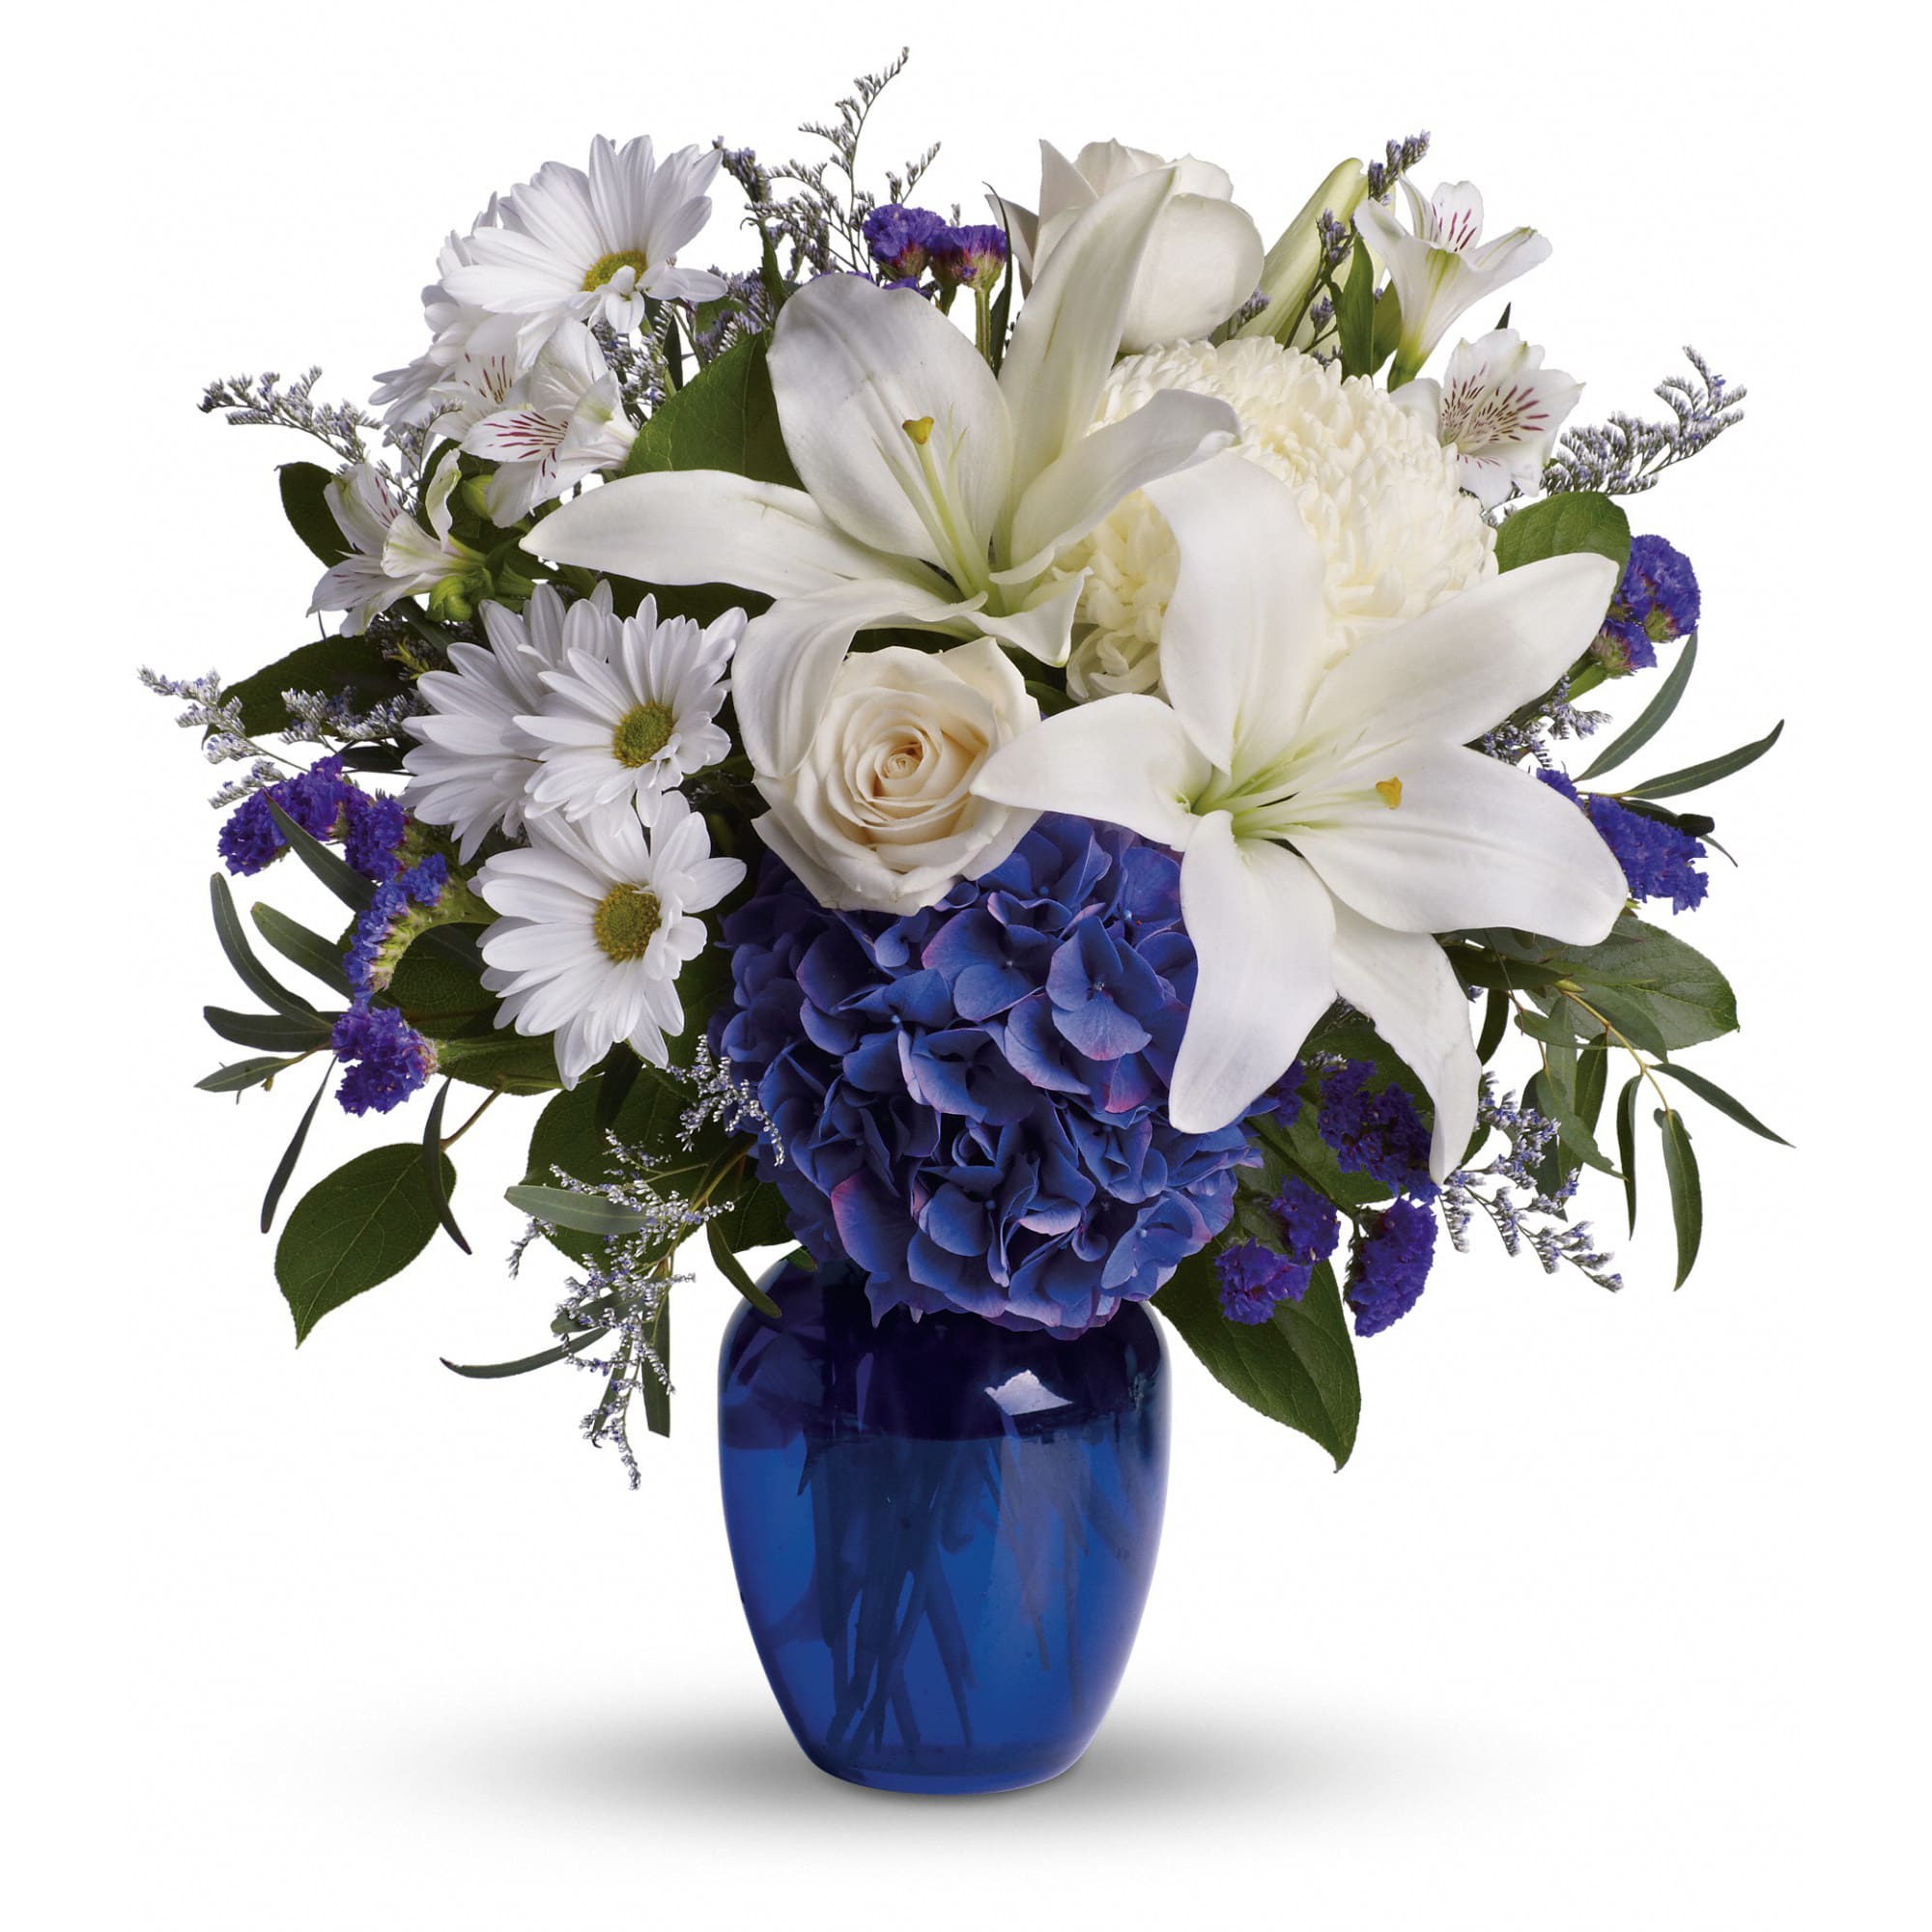 Beautiful in Blue by Teleflora - In this arrangement, the serenity of the color blue along with the purity of intention symbolized by white will let the family know you are sending your calm strength to them during these difficult times.****CONTAINER MAY NOT BE AVAILABLE SUBSTITUTION WILL BE MADE IF NEEDED  CALL 860-875-5145 WITH QUESTIONS ****** 